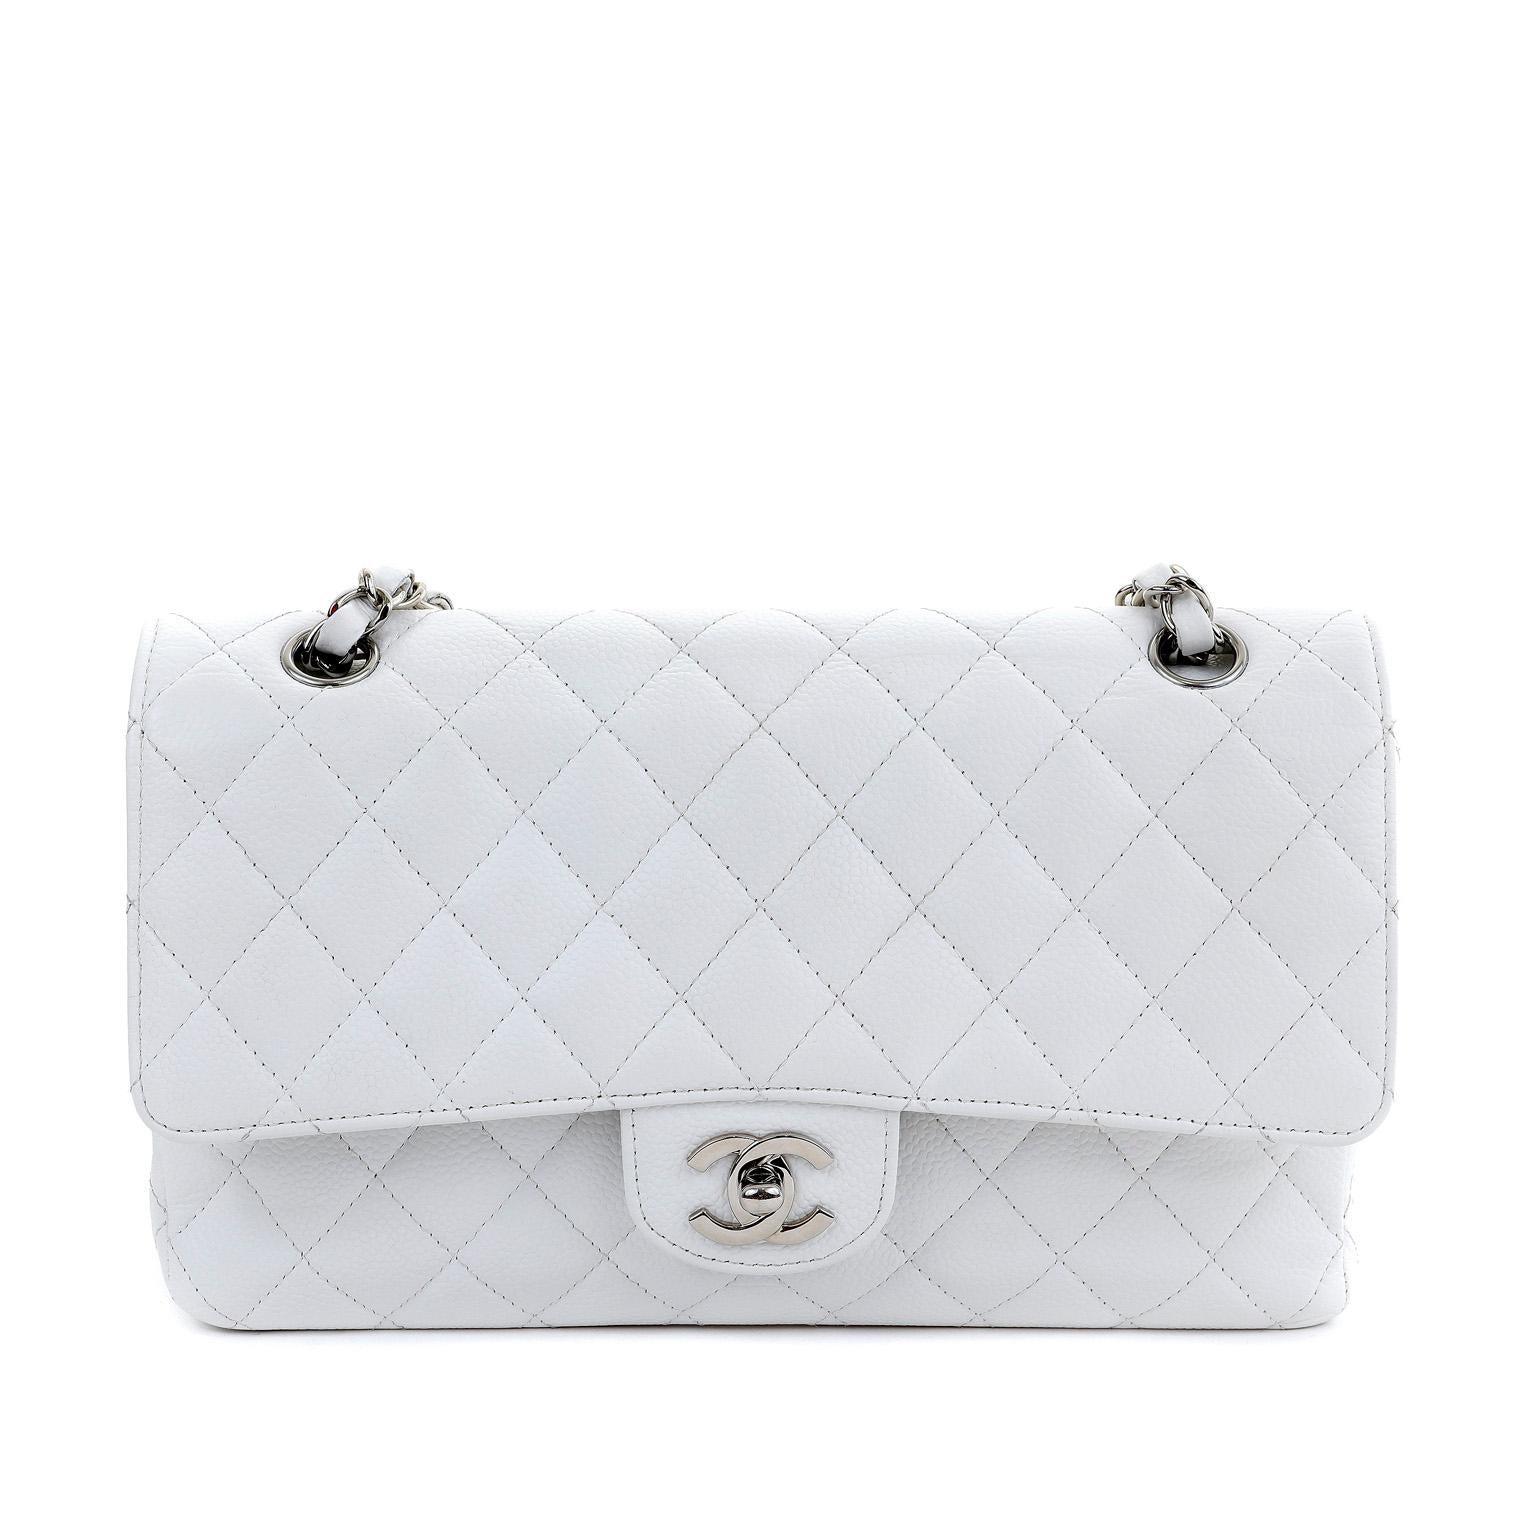 This authentic Chanel White Caviar Leather Medium Classic Flap Bag is in pristine condition.  A key piece in any sophisticated wardrobe, the Classic Flap is one of the most sought-after Chanel styles produced. 
Durable and textured snowy white